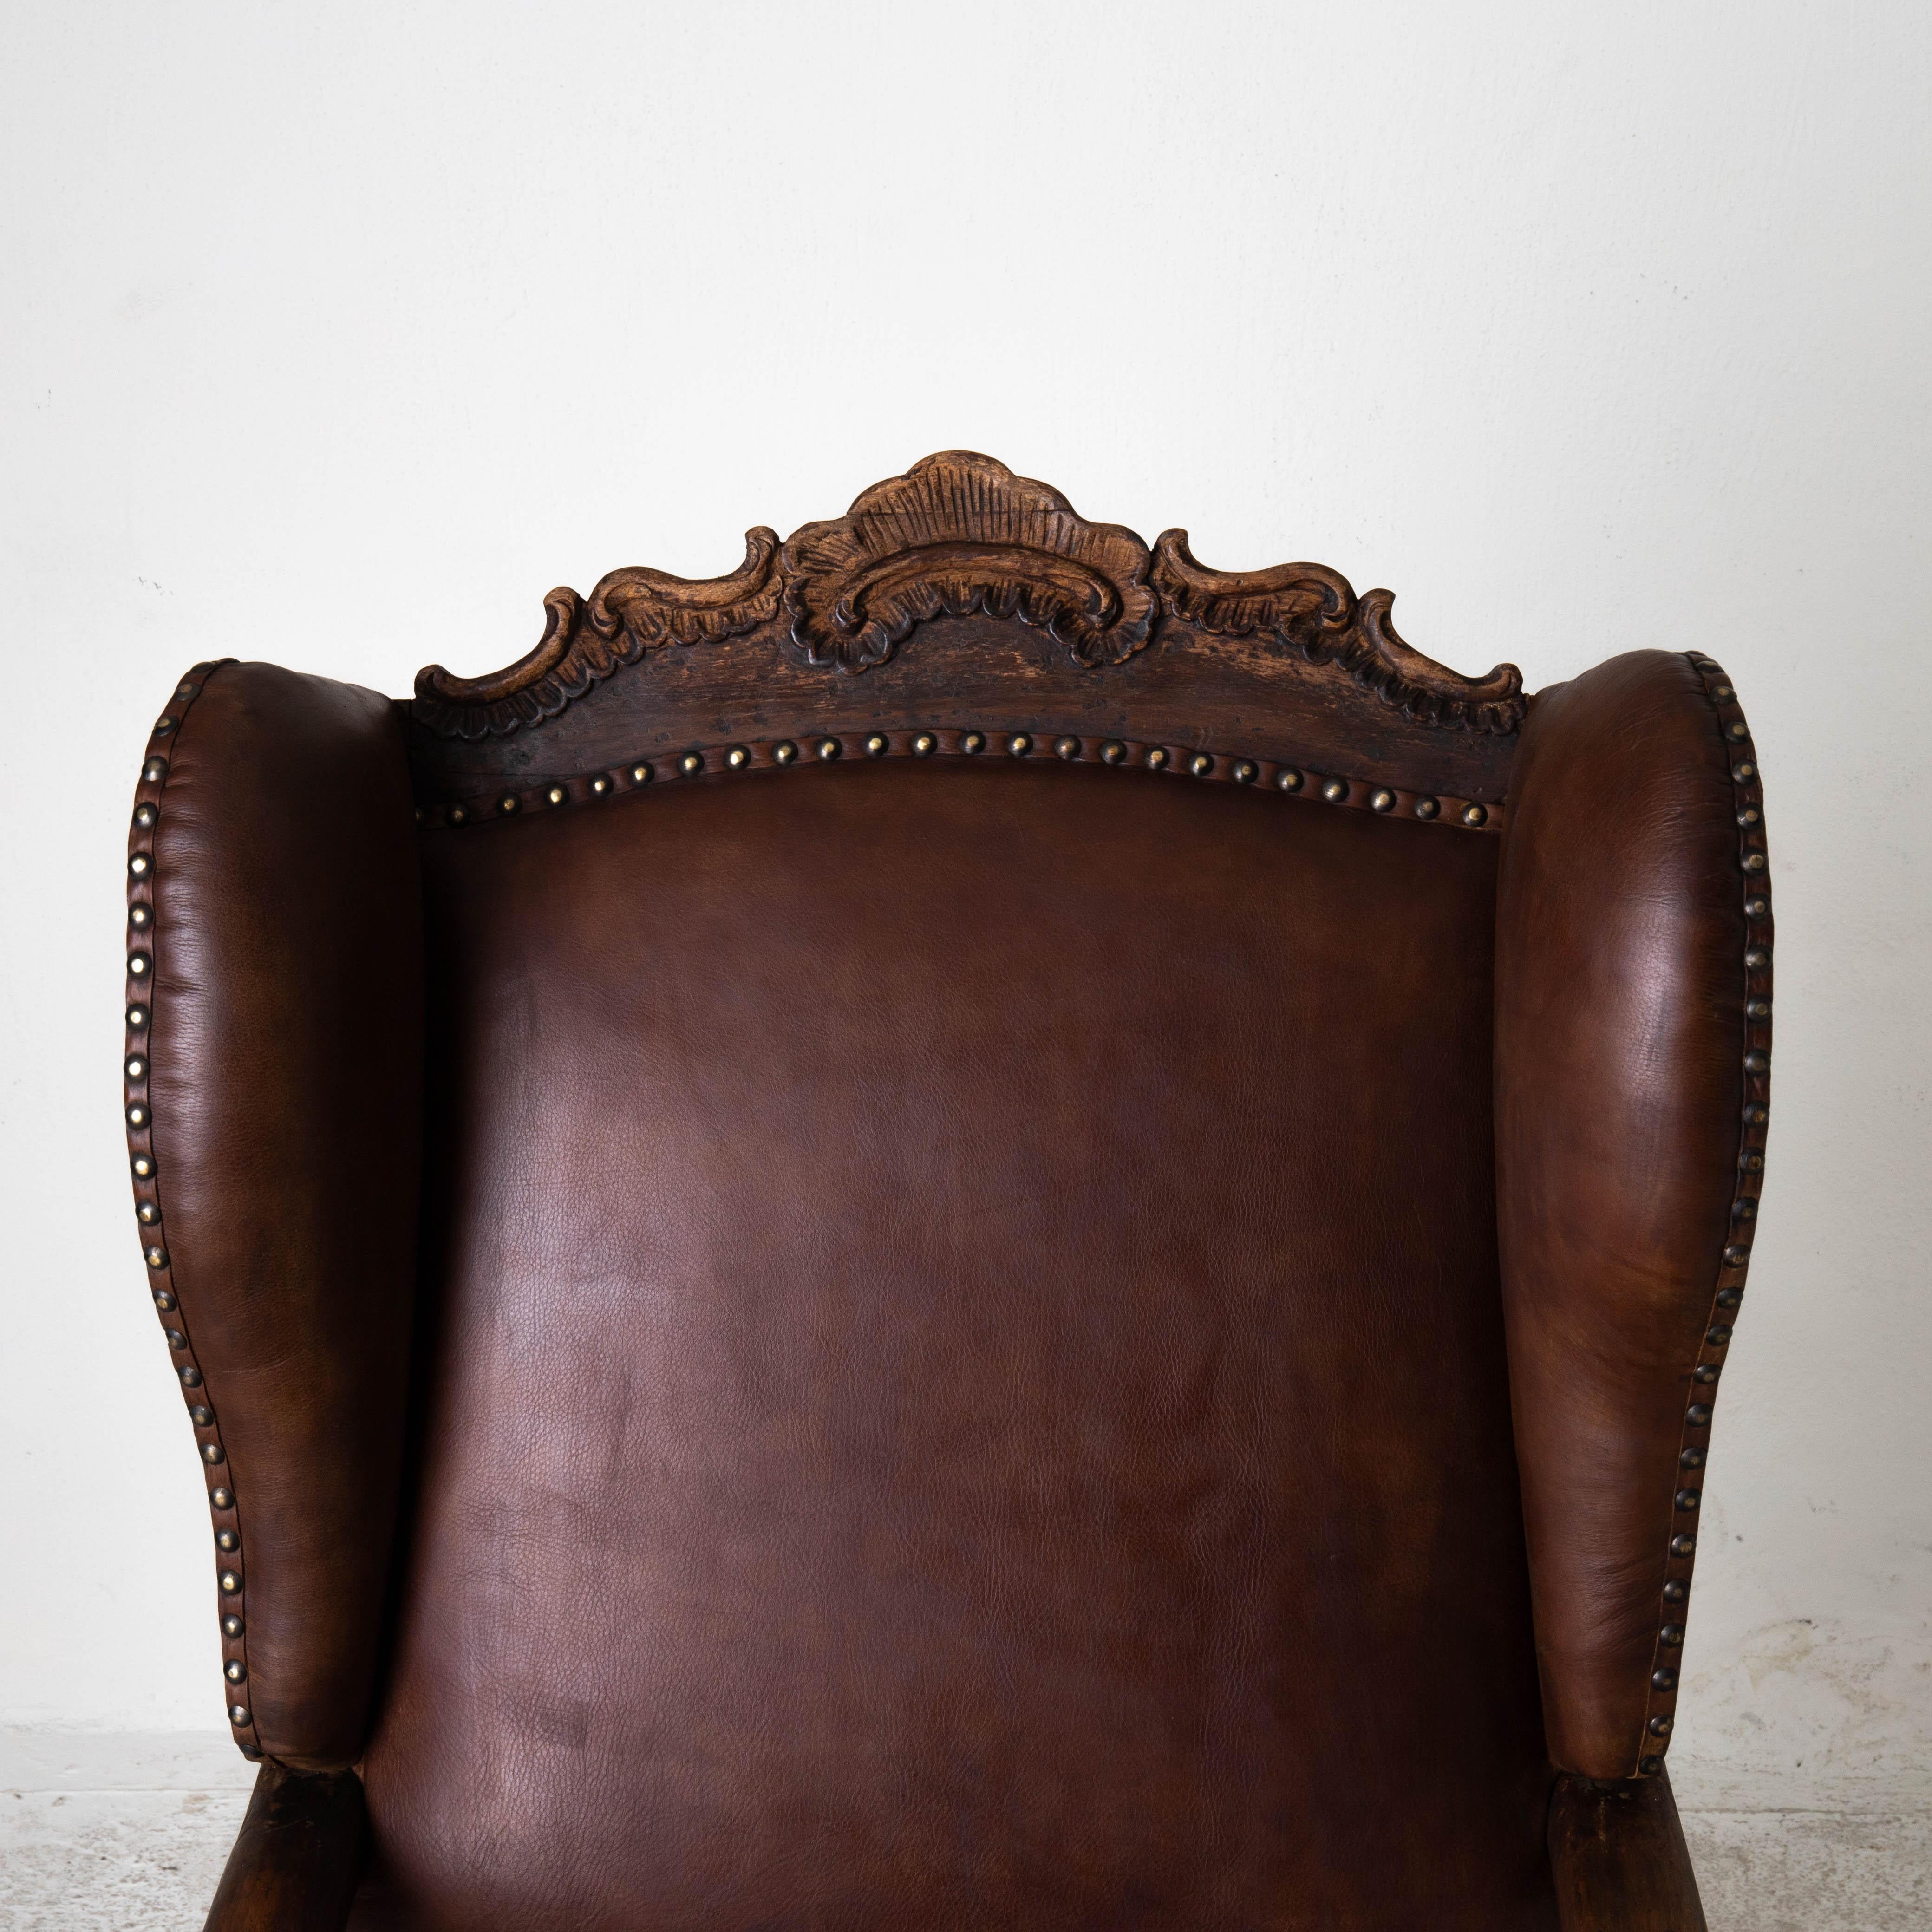 Chair Wingback Swedish Rococo Period 1750-1775 Brown Leather Sweden For Sale 3